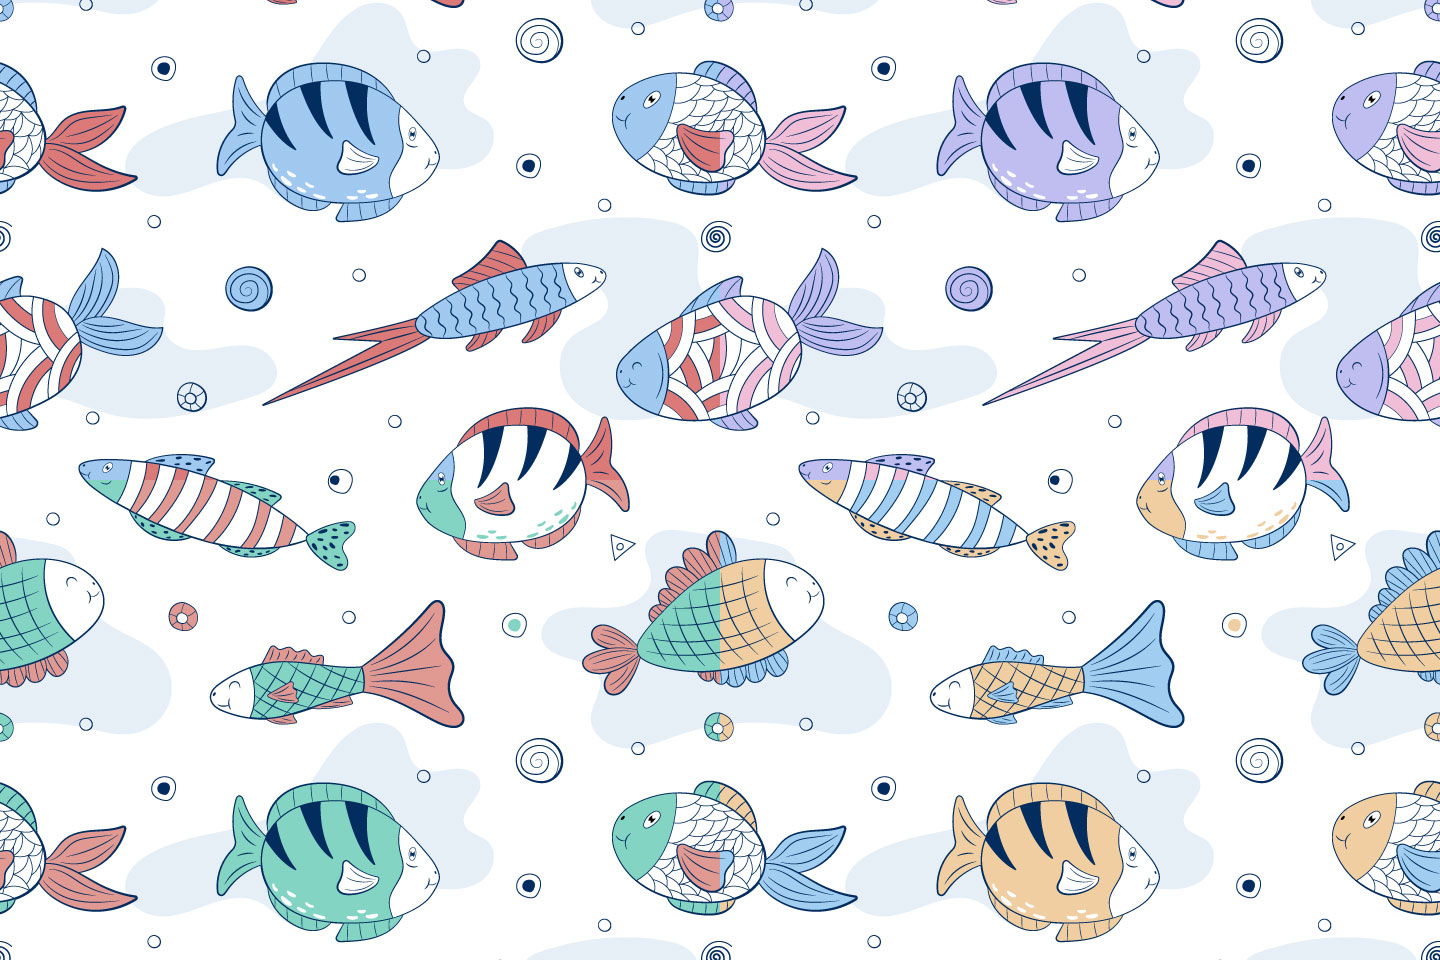 Fish in Doodle Style Free Vector Seamless Pattern